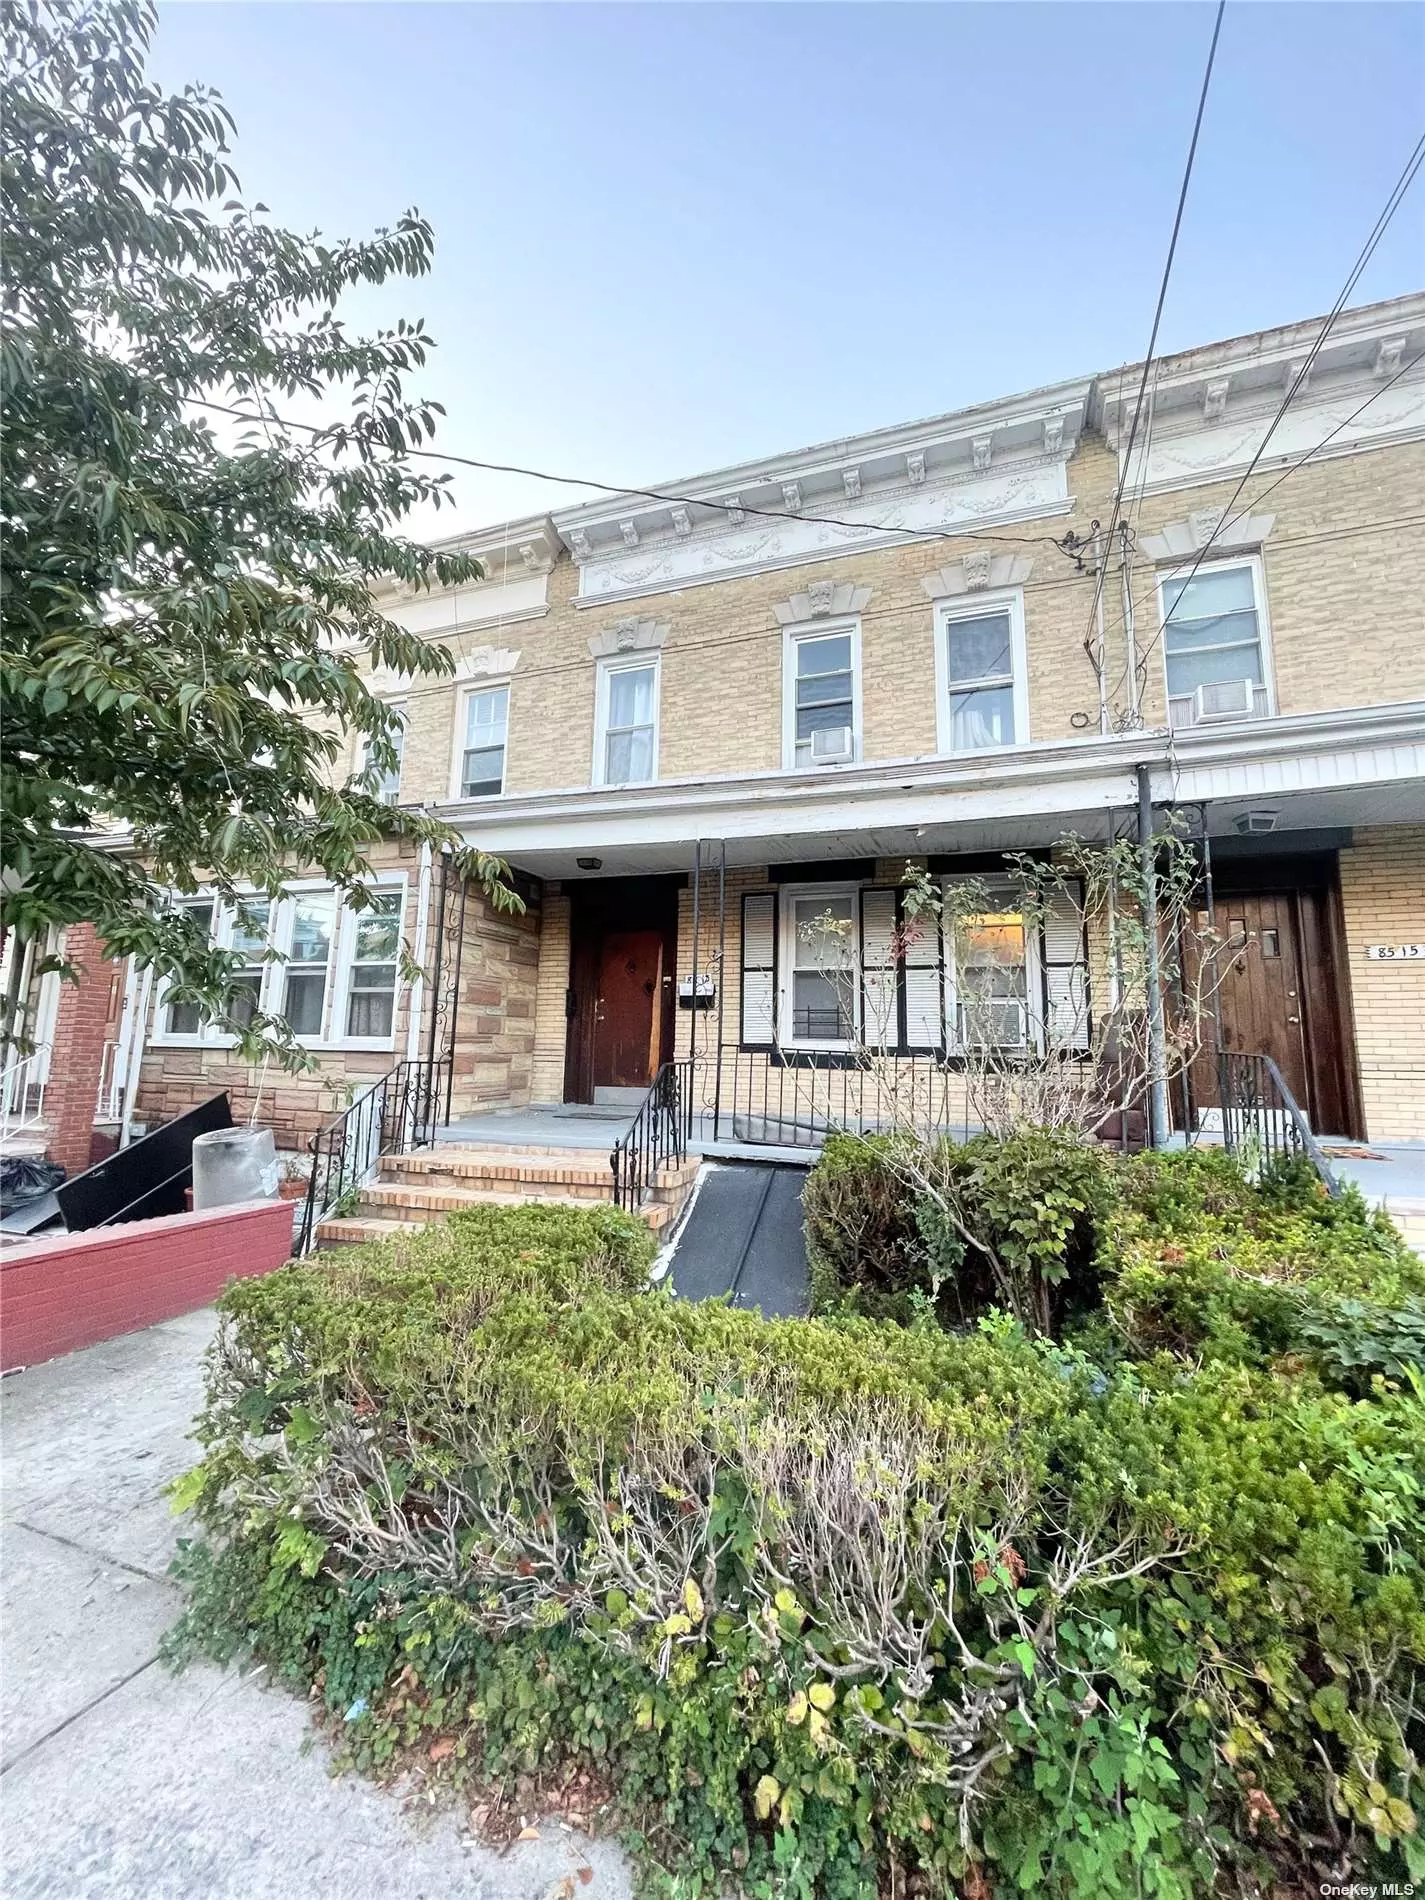 Don&rsquo;t Miss Out! Coveted solid brick legal two families house in the heart of Woodhaven, one of the most sought after neighborhoods of NYC. Conveniently located one short block from the local commercial artery, Jamaica Ave., and J/Z subway station, literally 30 minutes ride to Manhattan. This splendid house features 3 bedrooms 1 bathroom over 3 bedrooms 1 bathroom over full finished basement. Both units are in move in condition. Tremendous upside potential with nearly 70K annual rent roll.